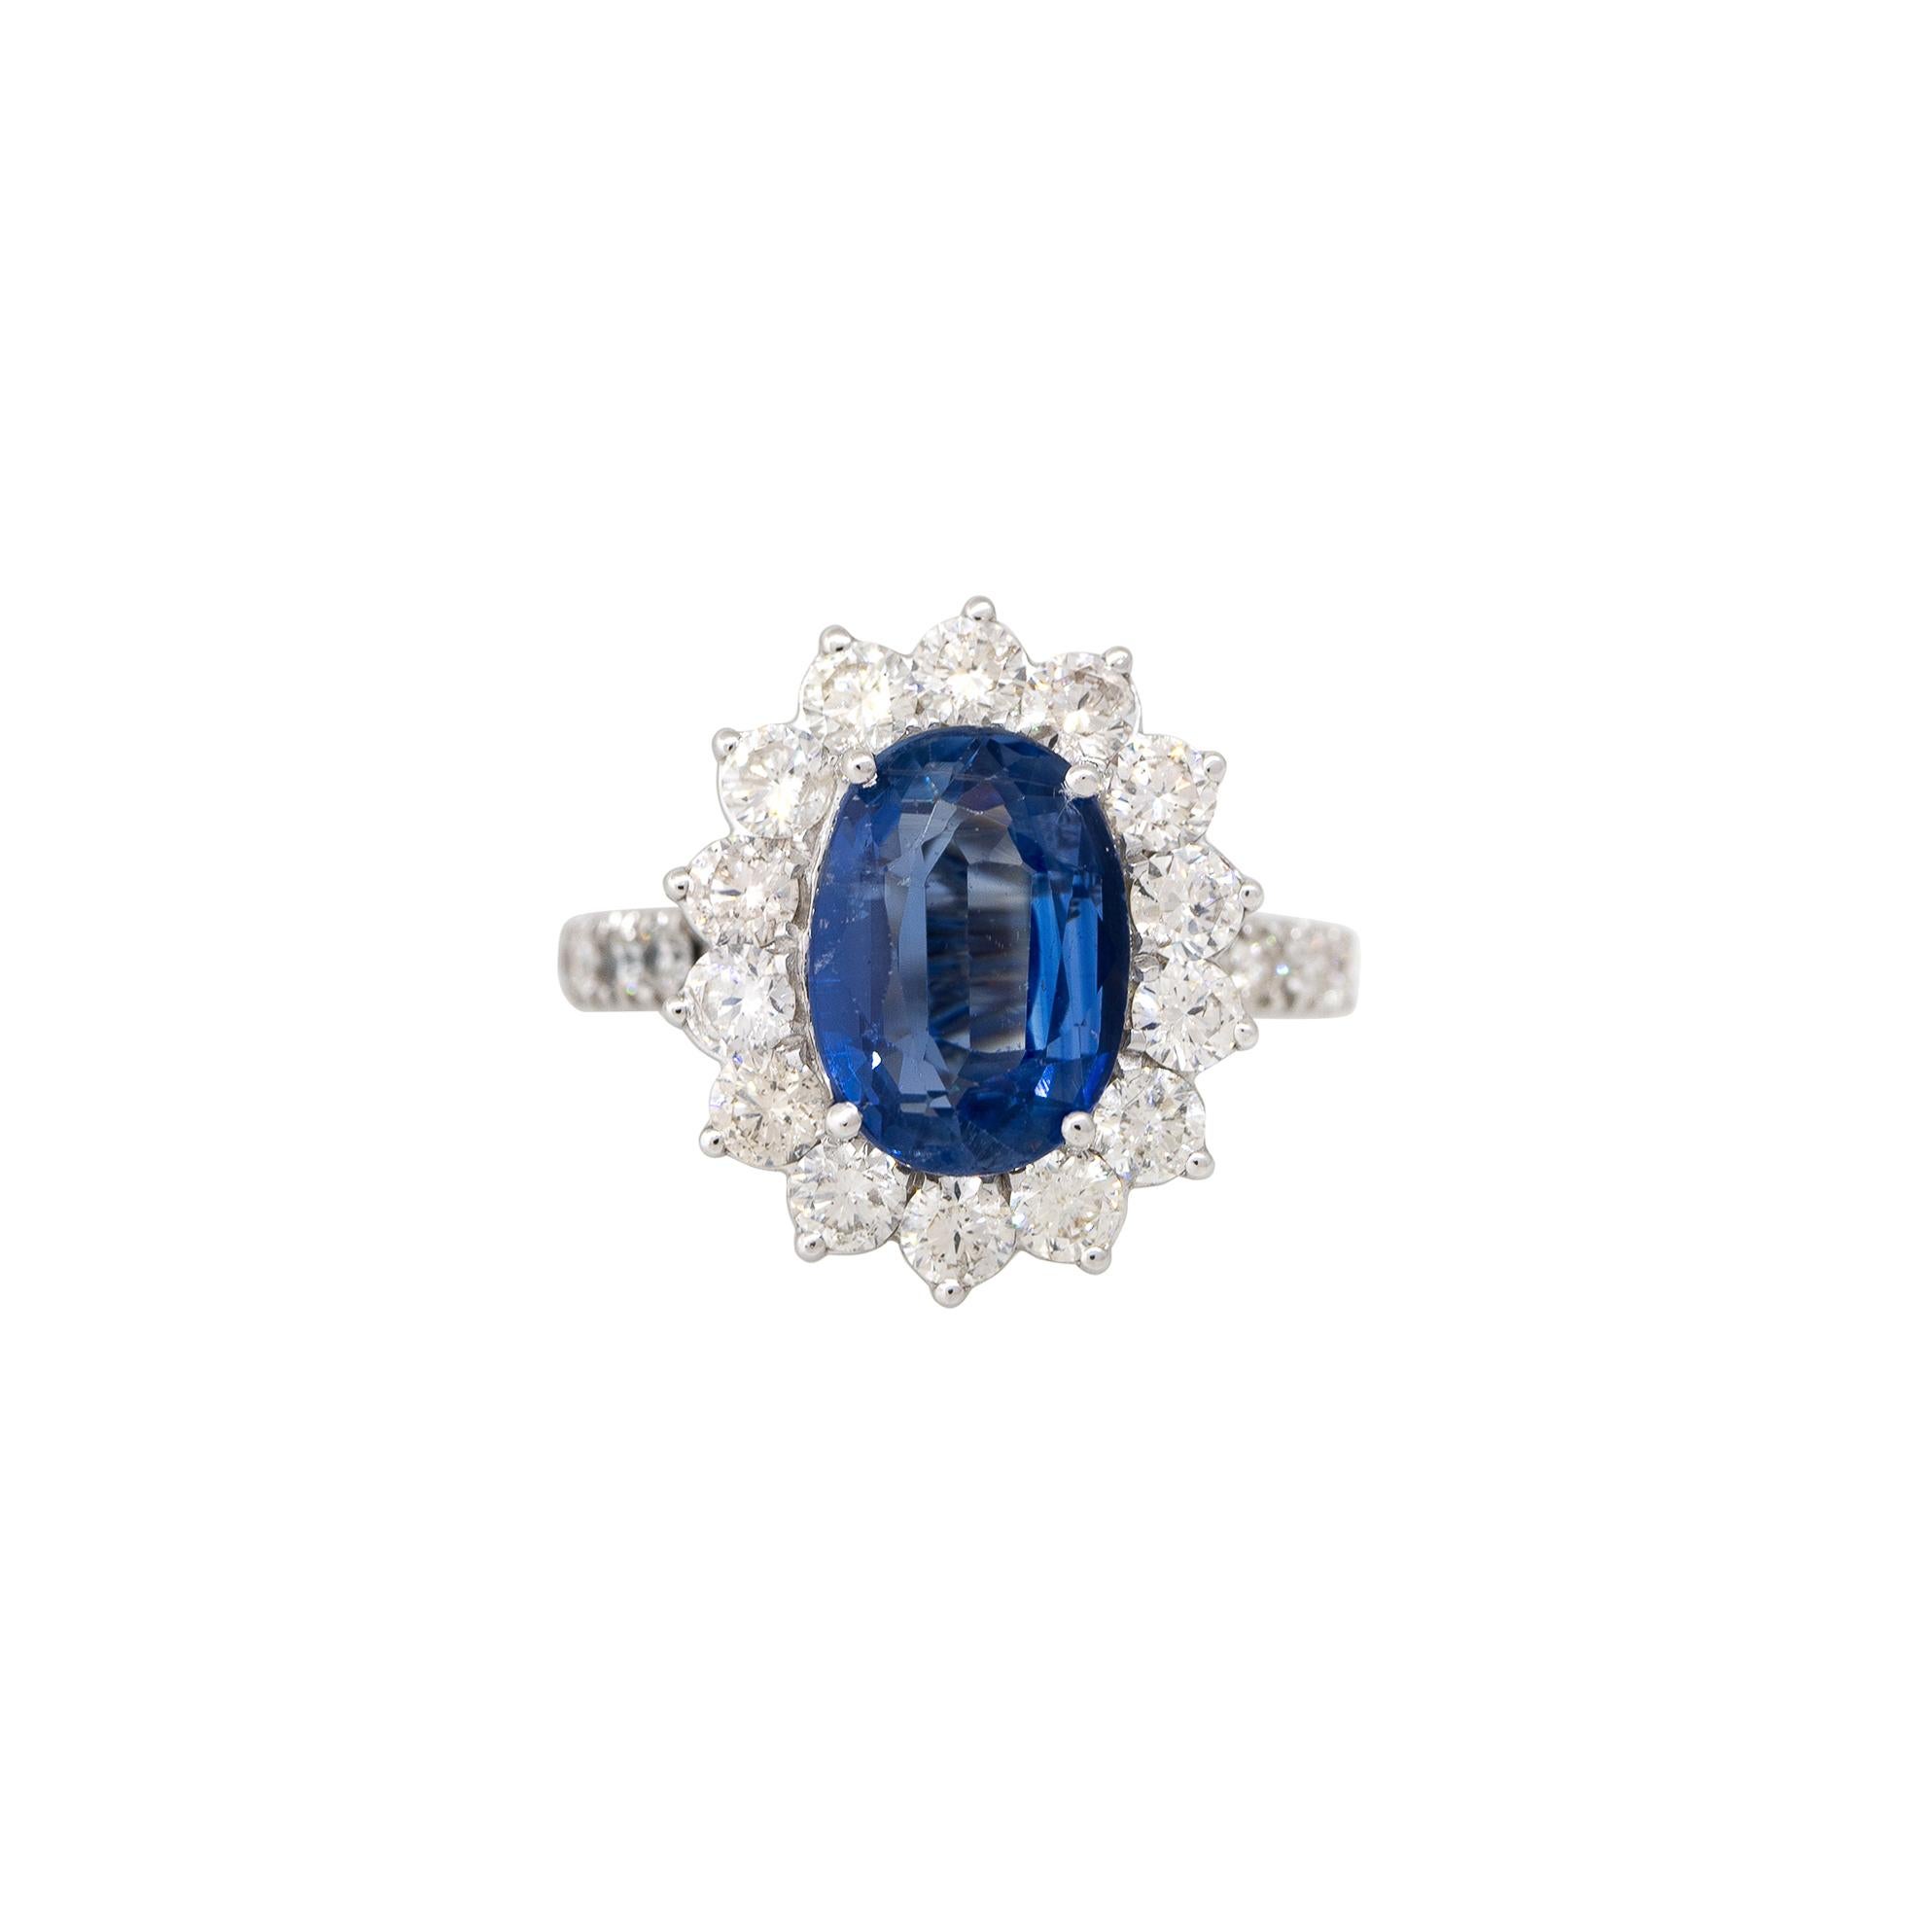 18k White Gold 2.33ct Oval Cut Kyanite & 1.18ct Diamond Halo Ring

Product: Oval-Cut Kyanite Gemstone and Diamond Halo Ring
Material: 18k White Gold
Gemstone/Diamond Details: The main stone is an oval-cut Kyanite gemstone, weighing approximately